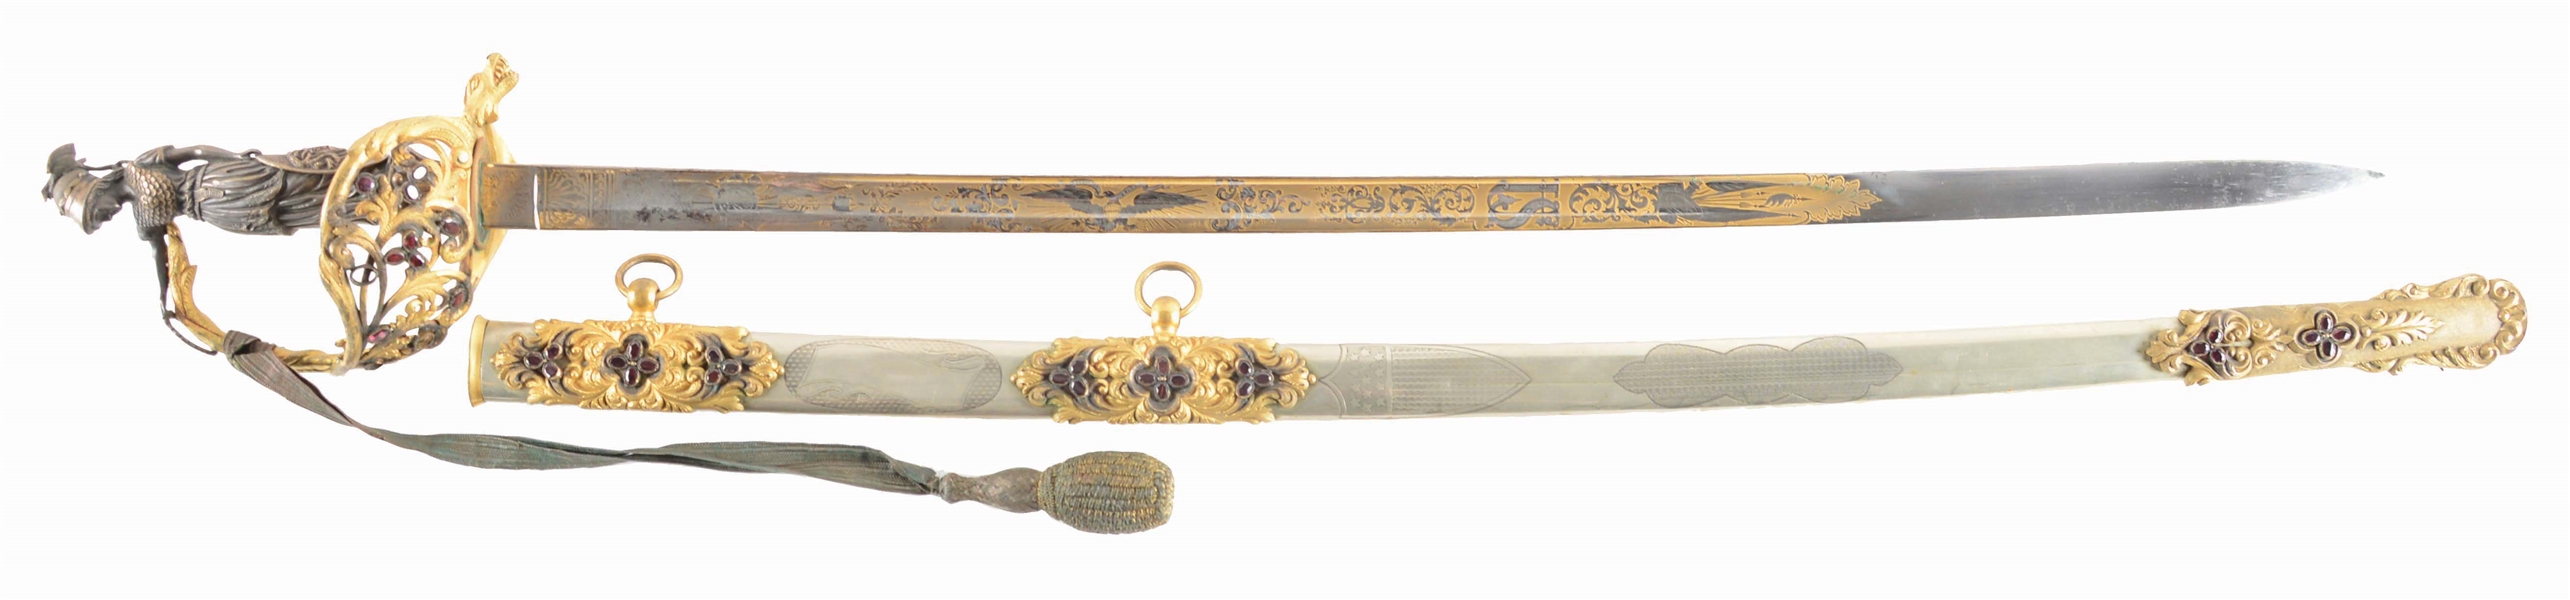 AN EXTREMELY FINE AND ELABORATE STATUE HILTED CIVIL WAR PRESENTATION SWORD WITH AMETHYST INLAID GILT BRASS MOUNTS AND SILVERED SCABBARD.